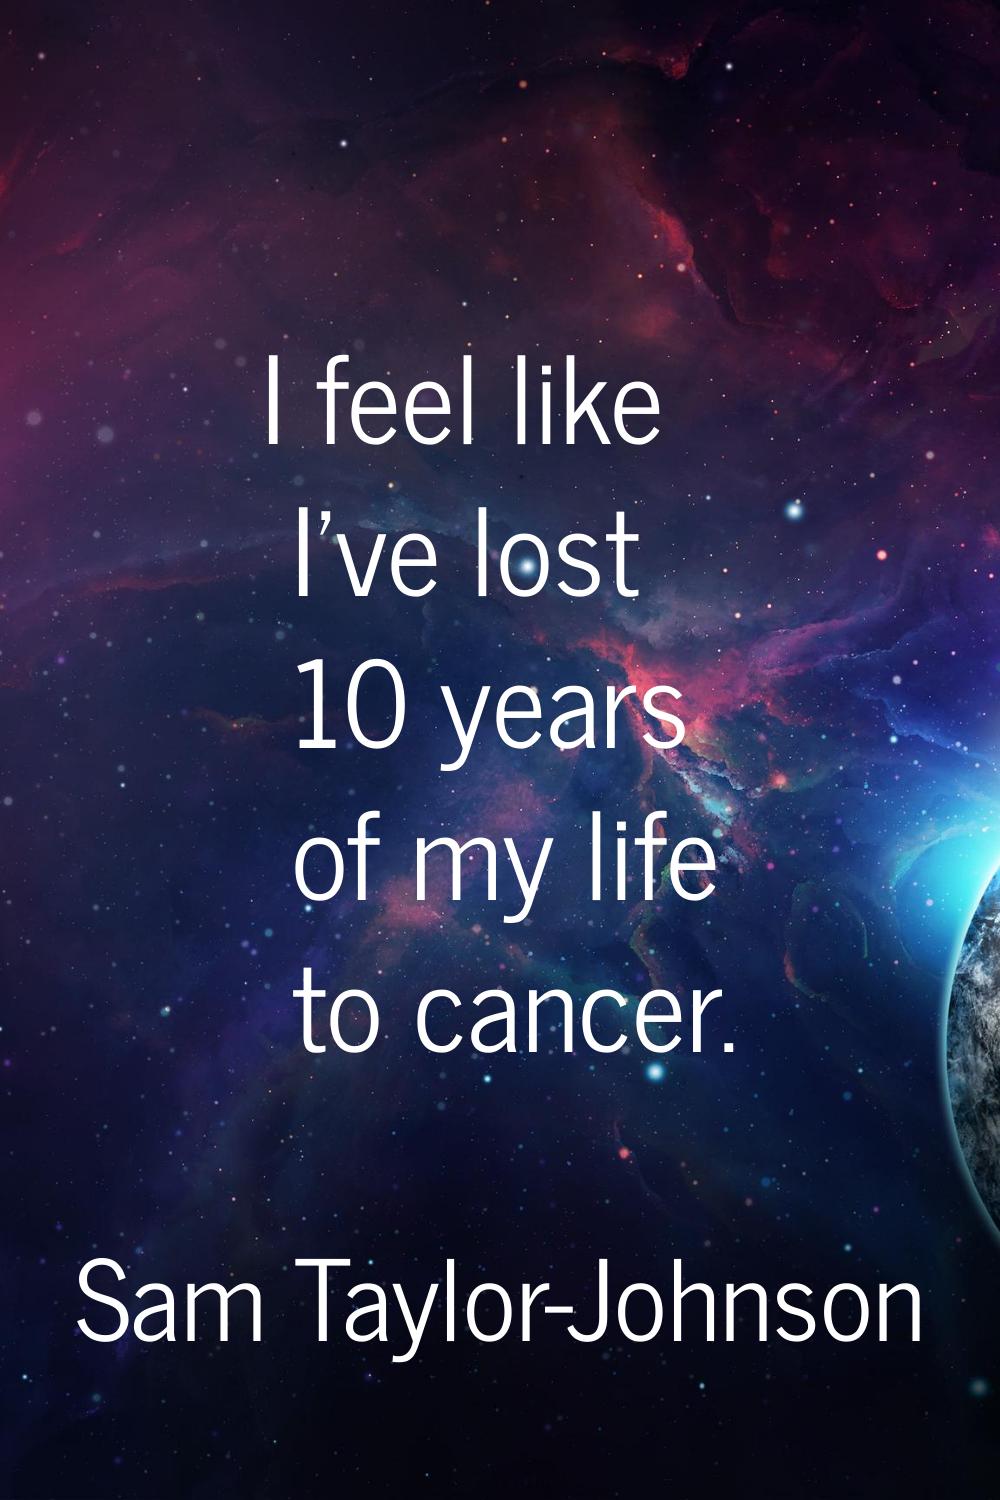 I feel like I've lost 10 years of my life to cancer.